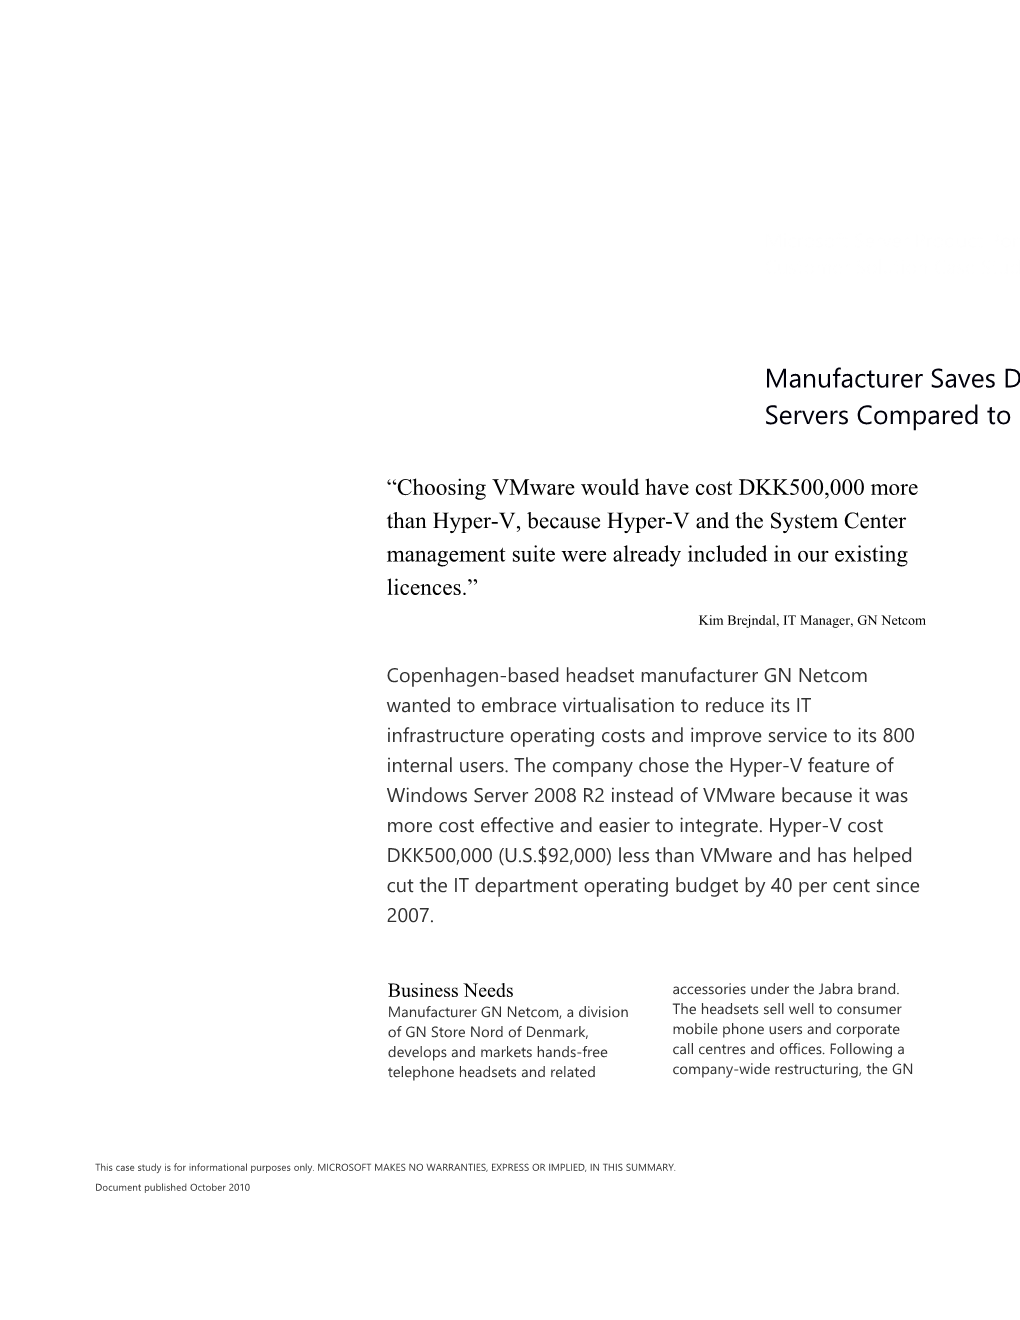 Writeimage CSB Danish Manufacturer Saves 500,000 Kroner on Virtual Servers Compared To